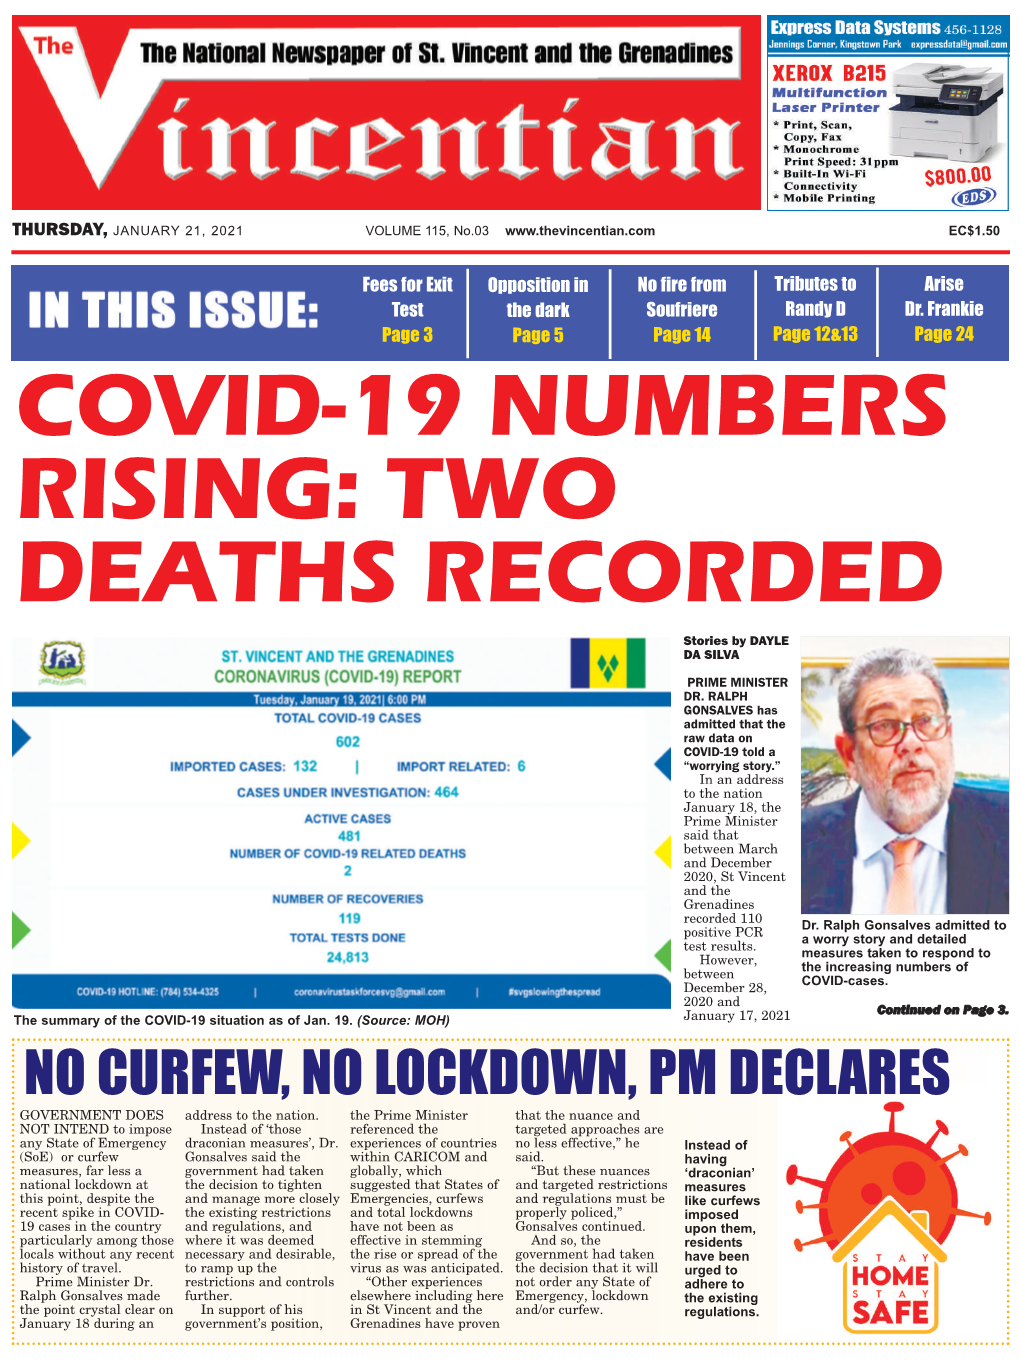 Covid-19 Numbers Rising: Two Deaths Recorded